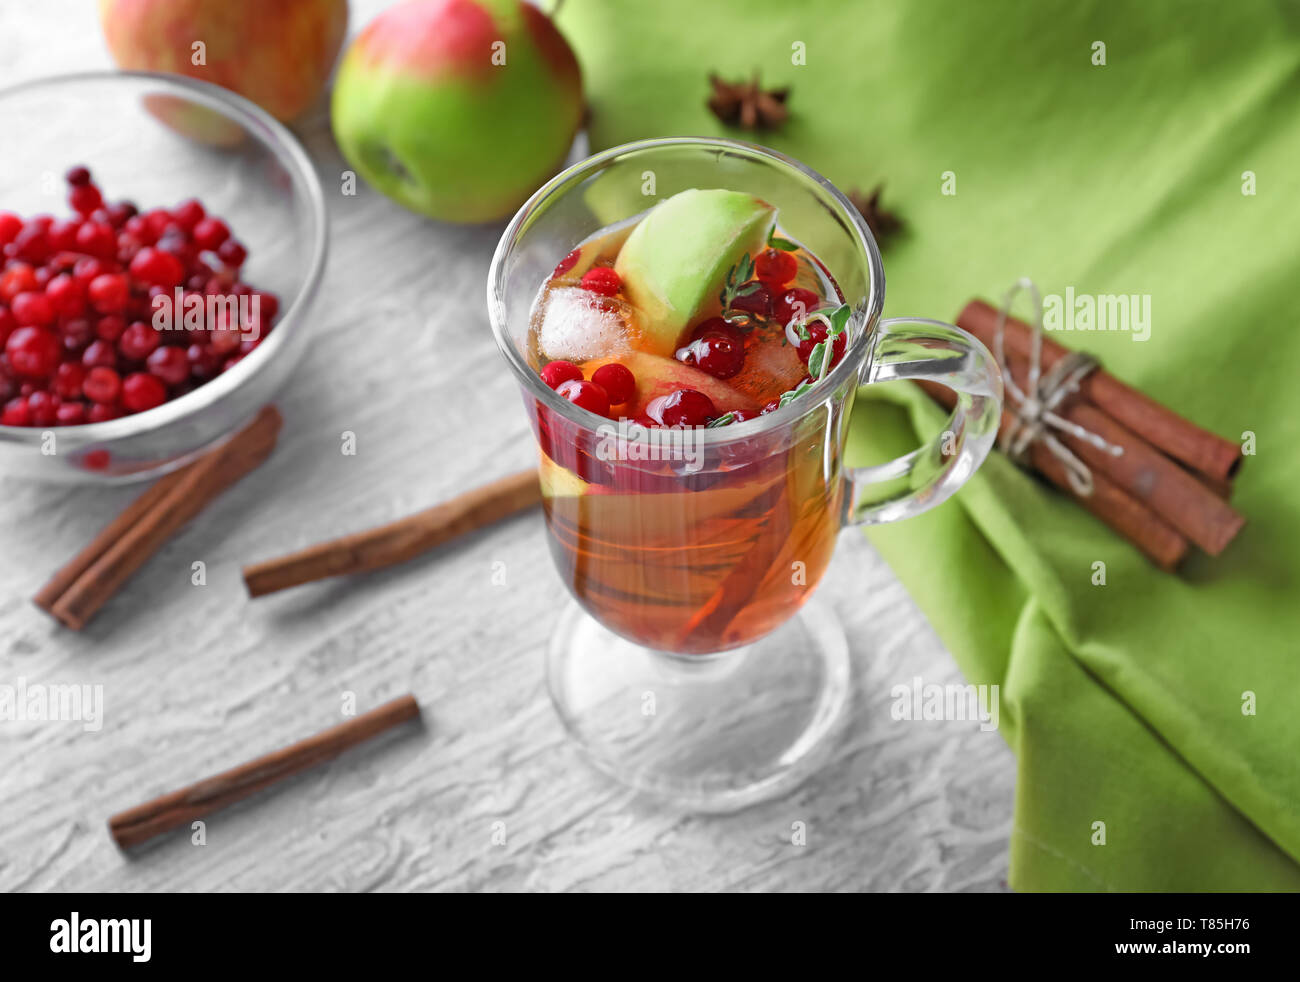 Beverage with apples and cranberry in glass cup on wooden table Stock Photo